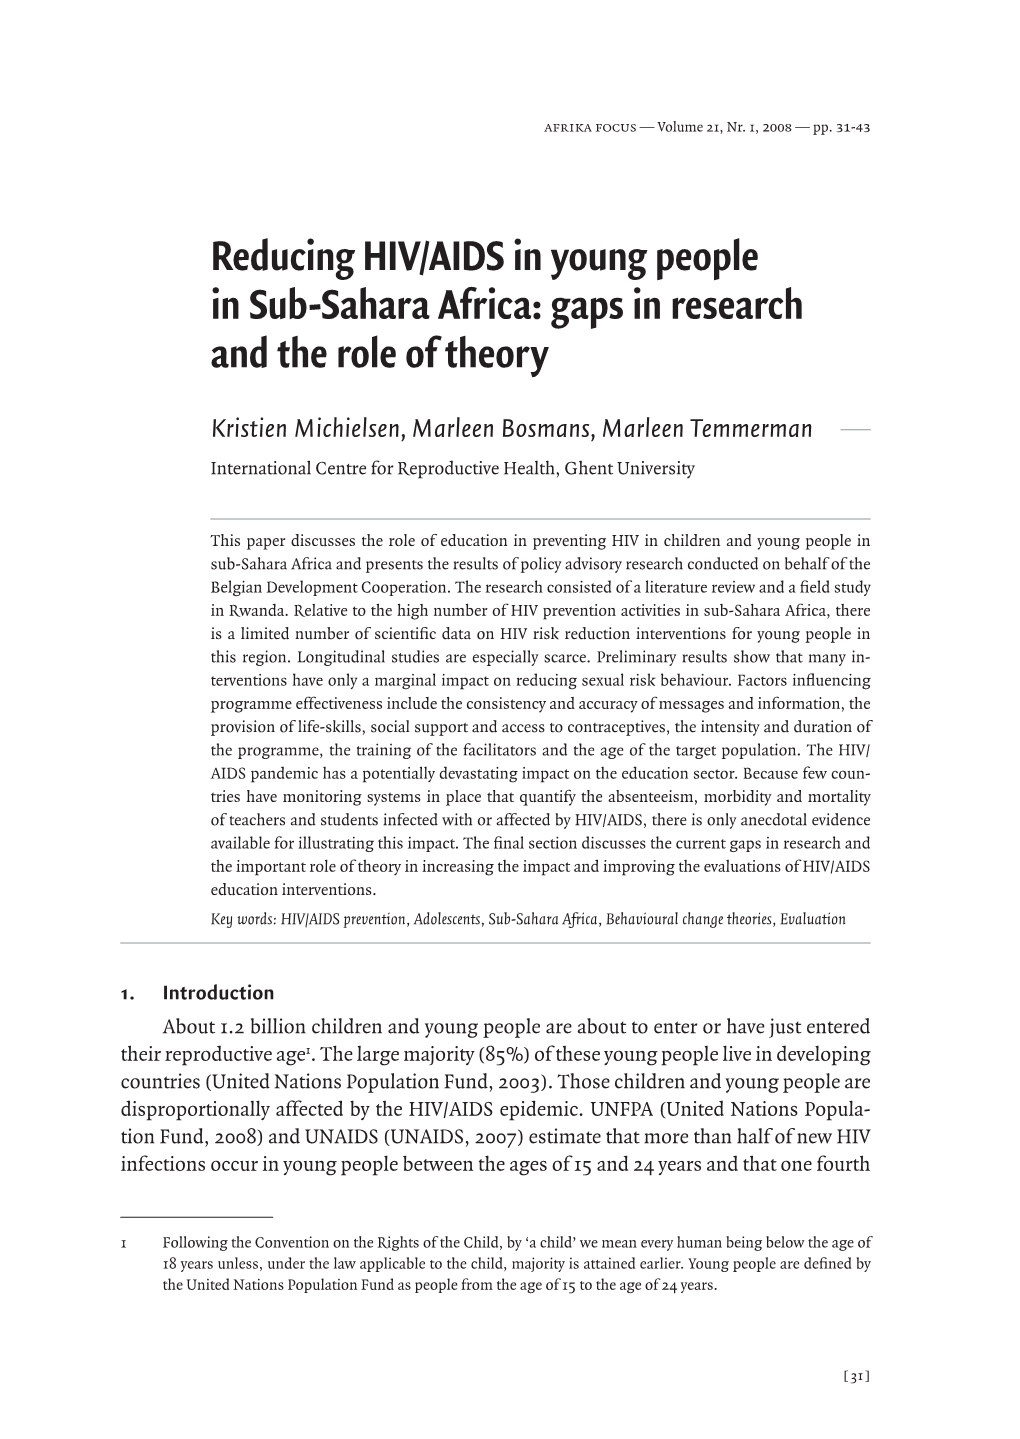 Reducing HIV/AIDS in Young People in Sub-Sahara Africa: Gaps in Research and the Role of Theory